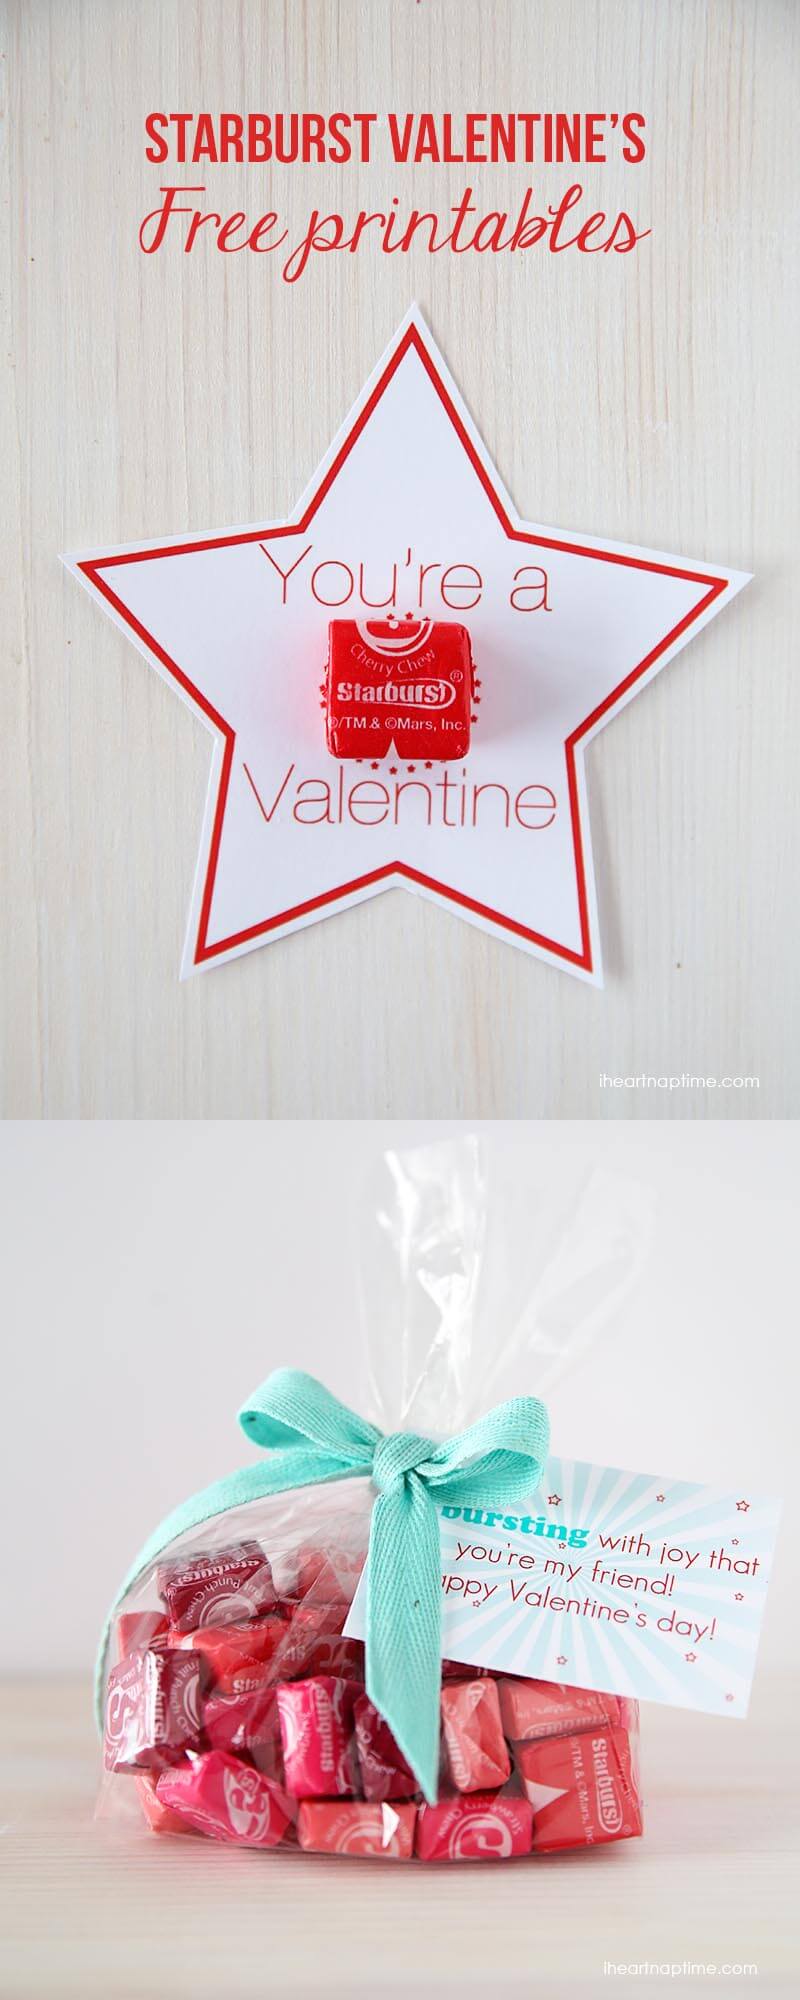 Love these Starburst Valentines on iheartnaptime.com ...there's 2 different free downloads! #freeprintables